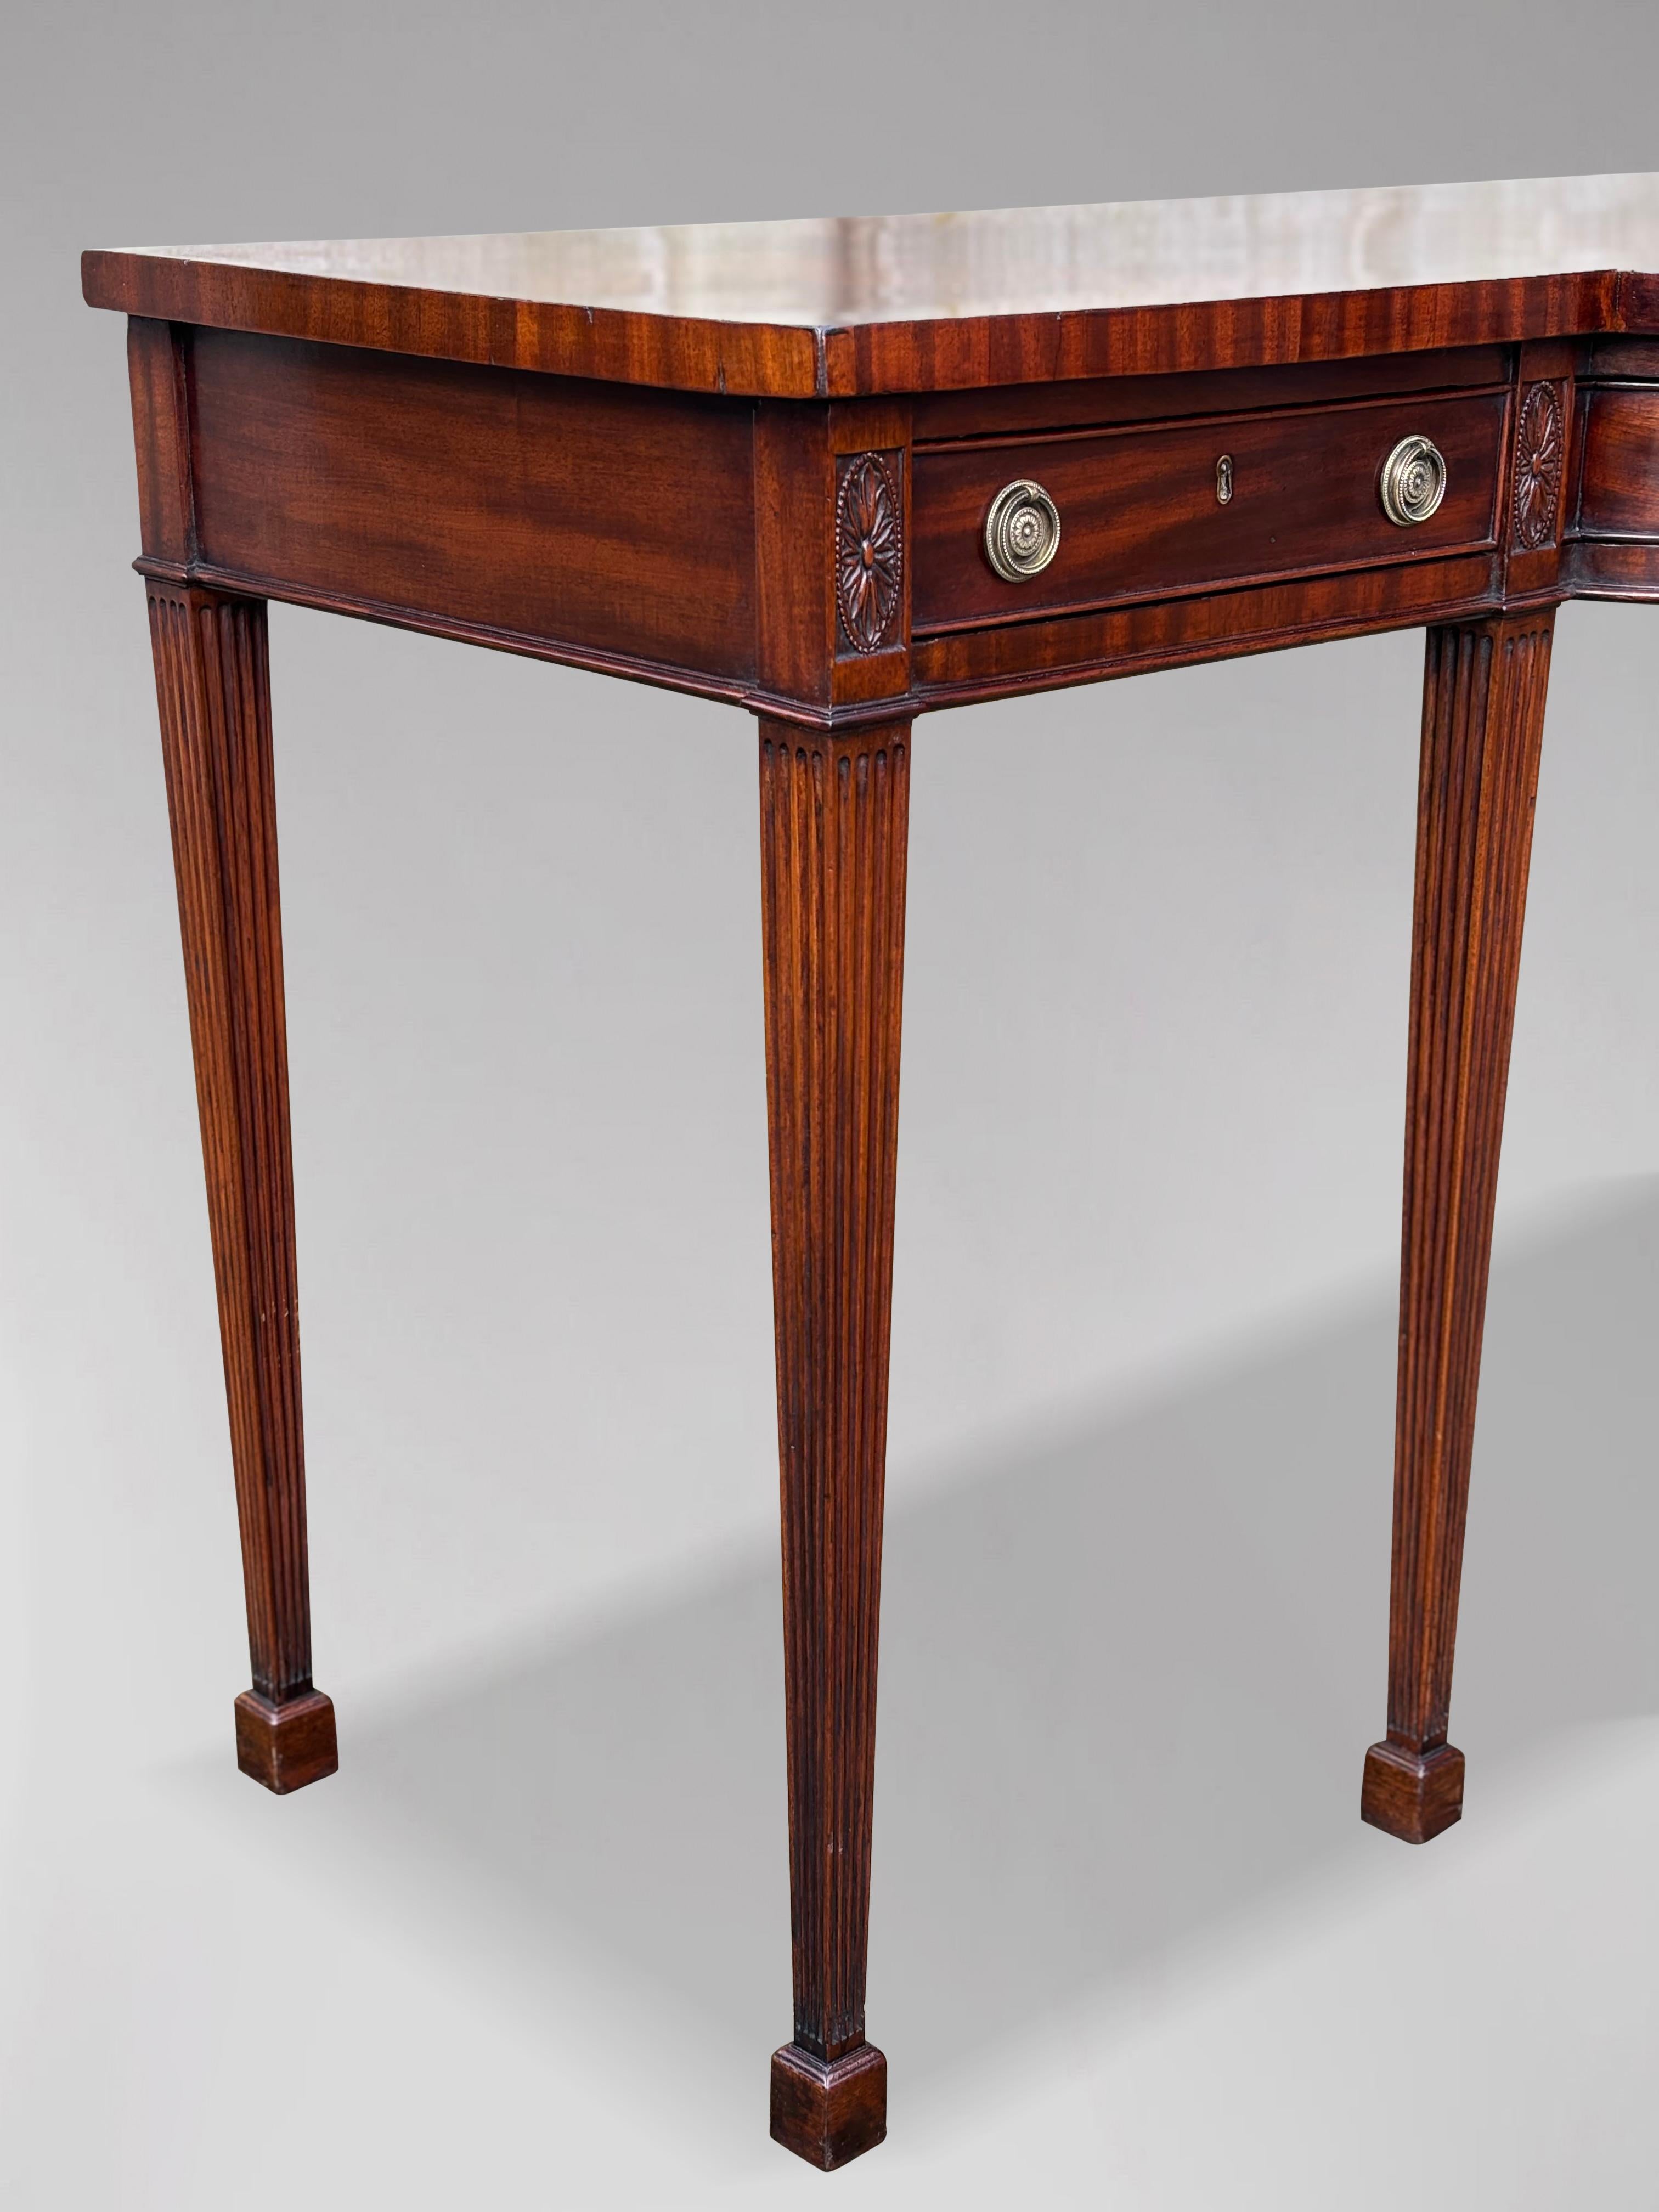 Early 19th Century George III Period Mahogany Serving Table In Good Condition For Sale In Petworth,West Sussex, GB